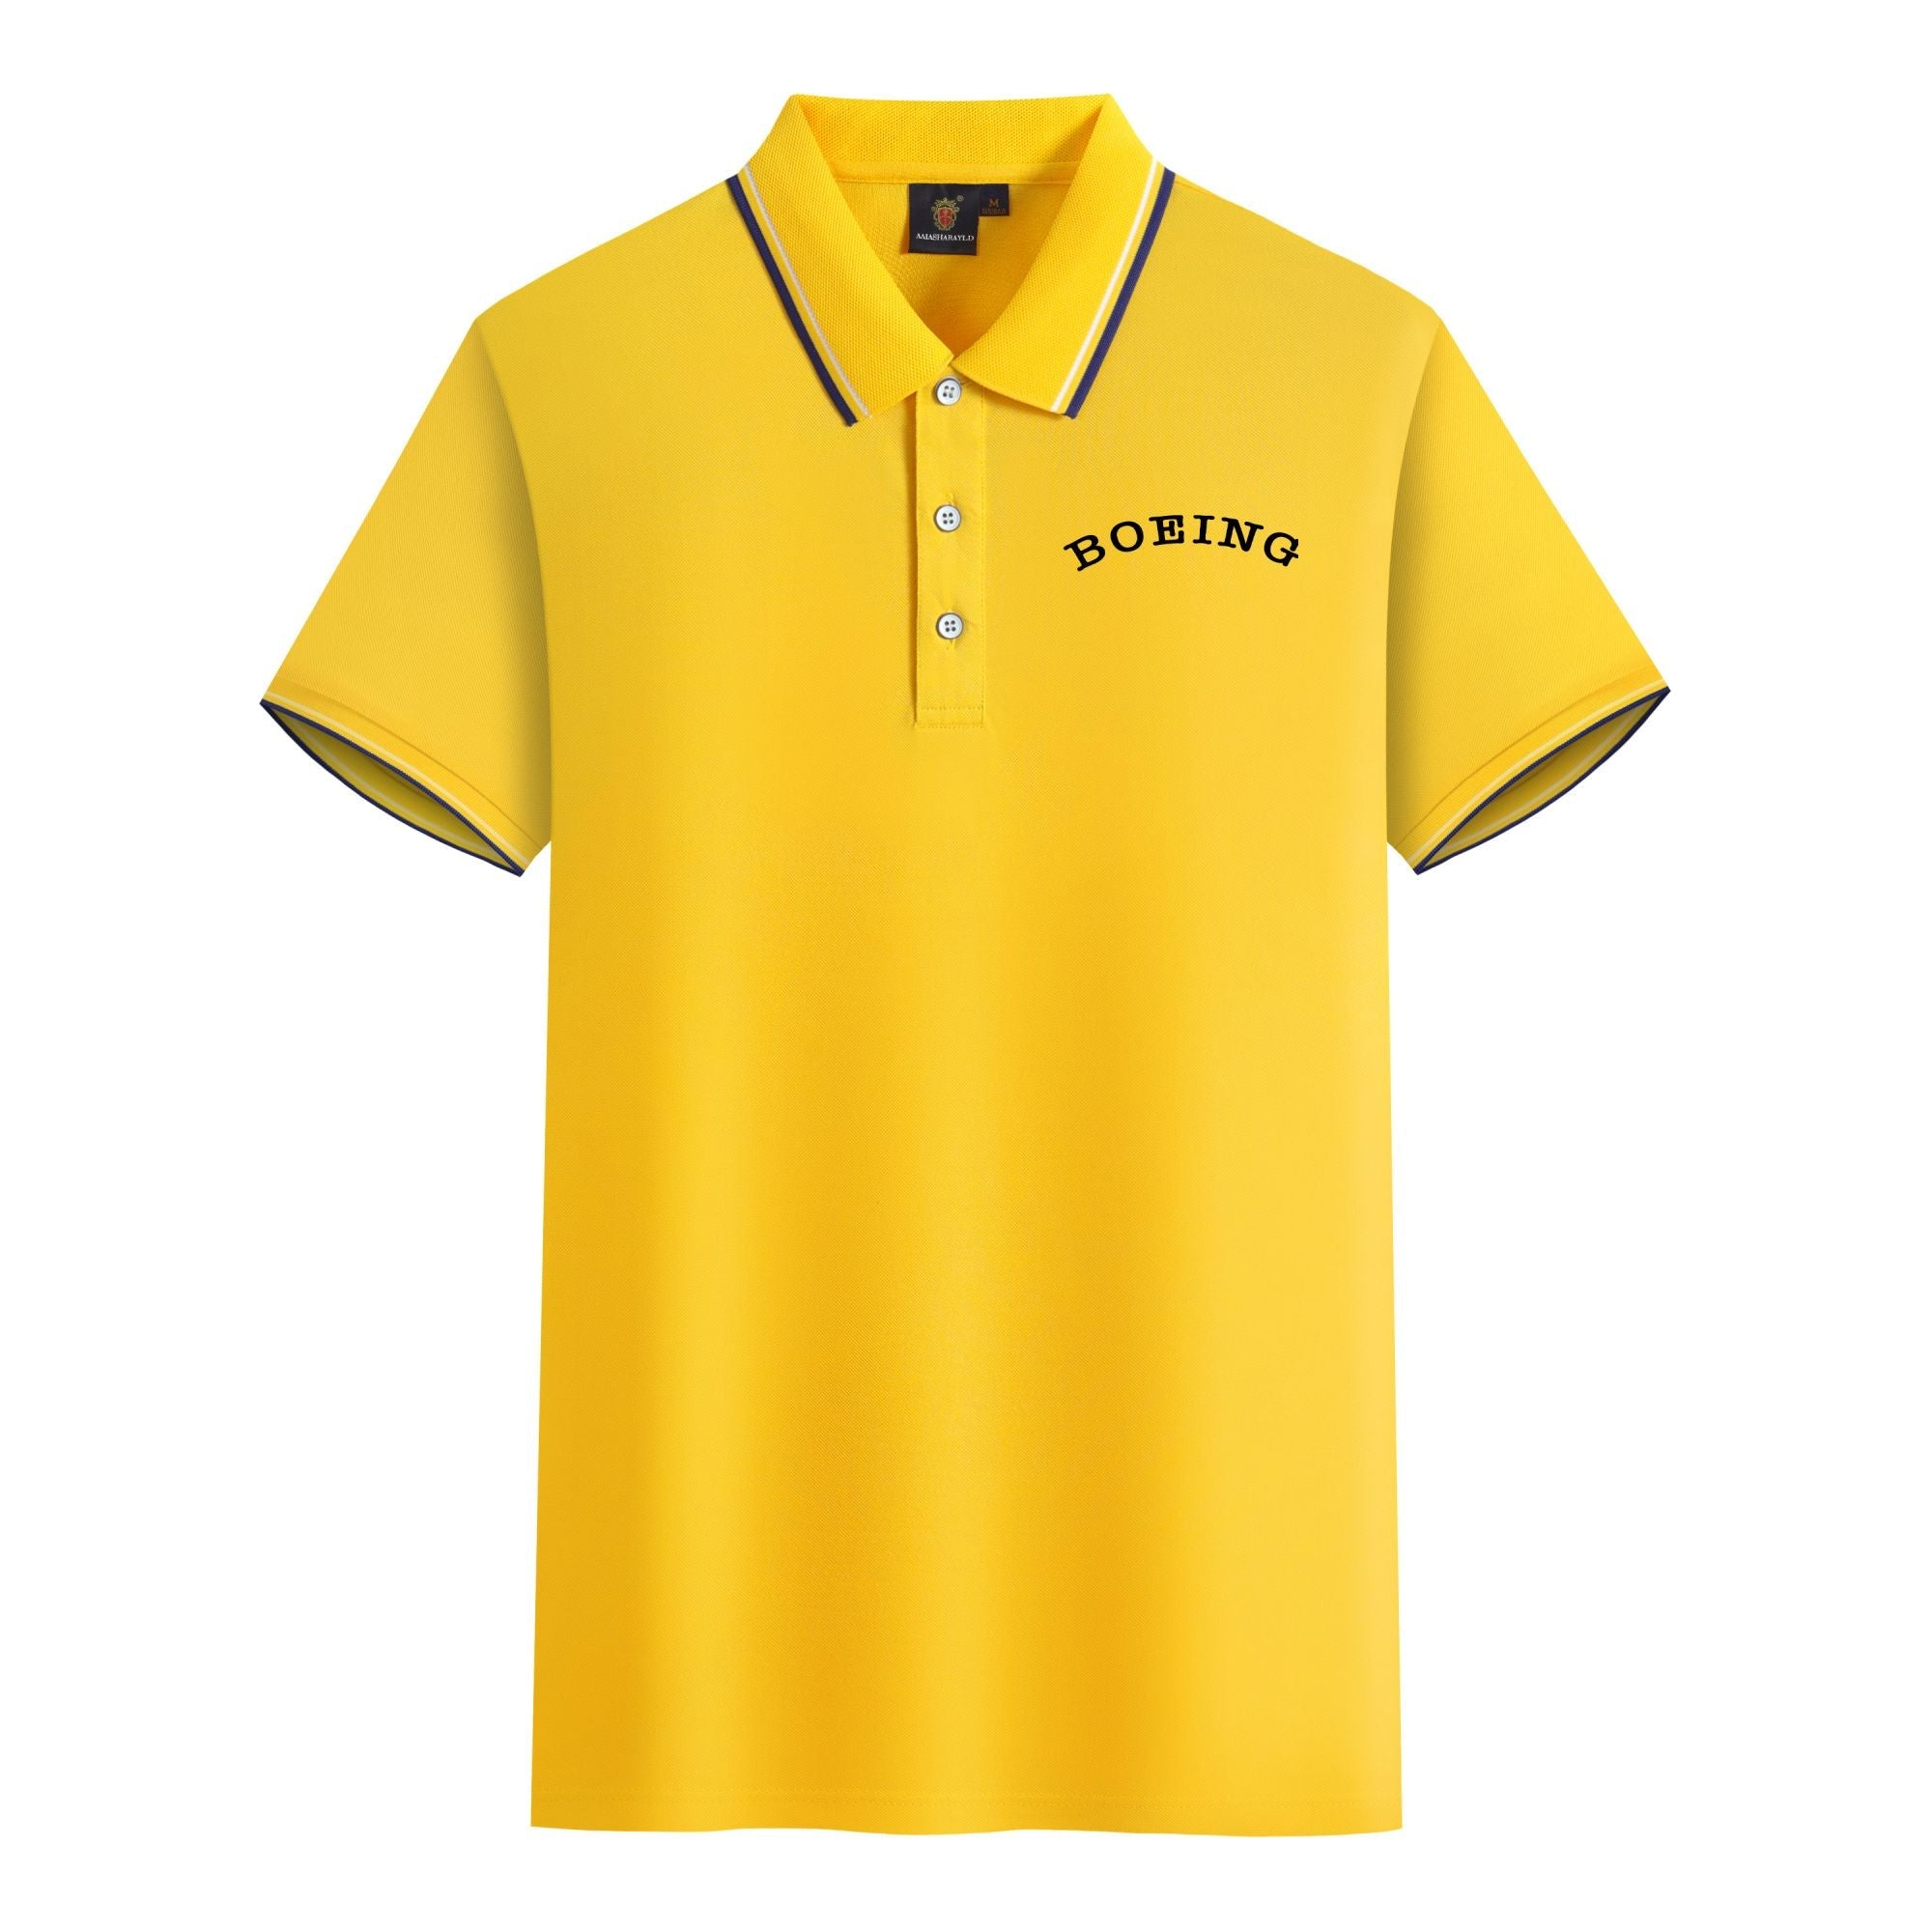 Special BOEING Text Designed Stylish Polo T-Shirts